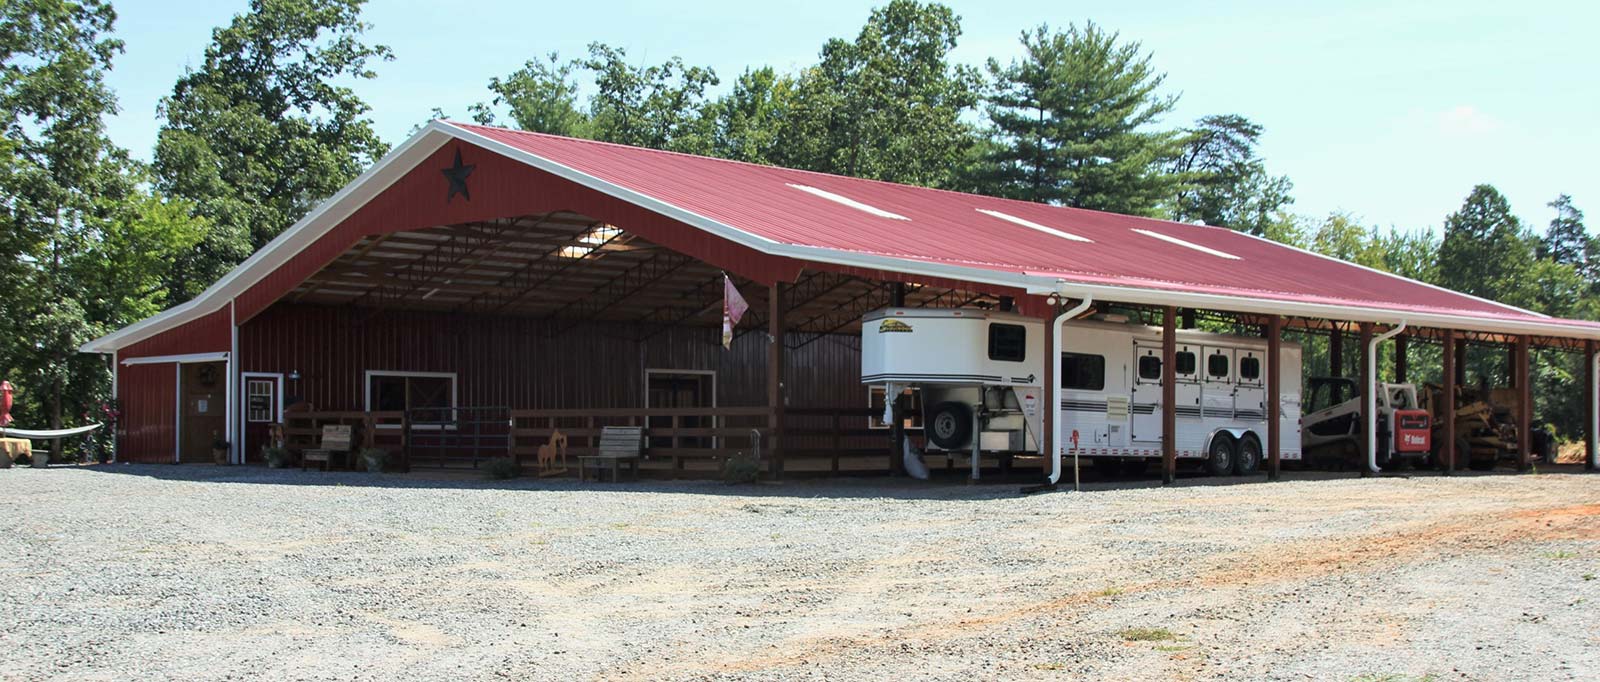 After construction view of trailer and farm equipment storage area